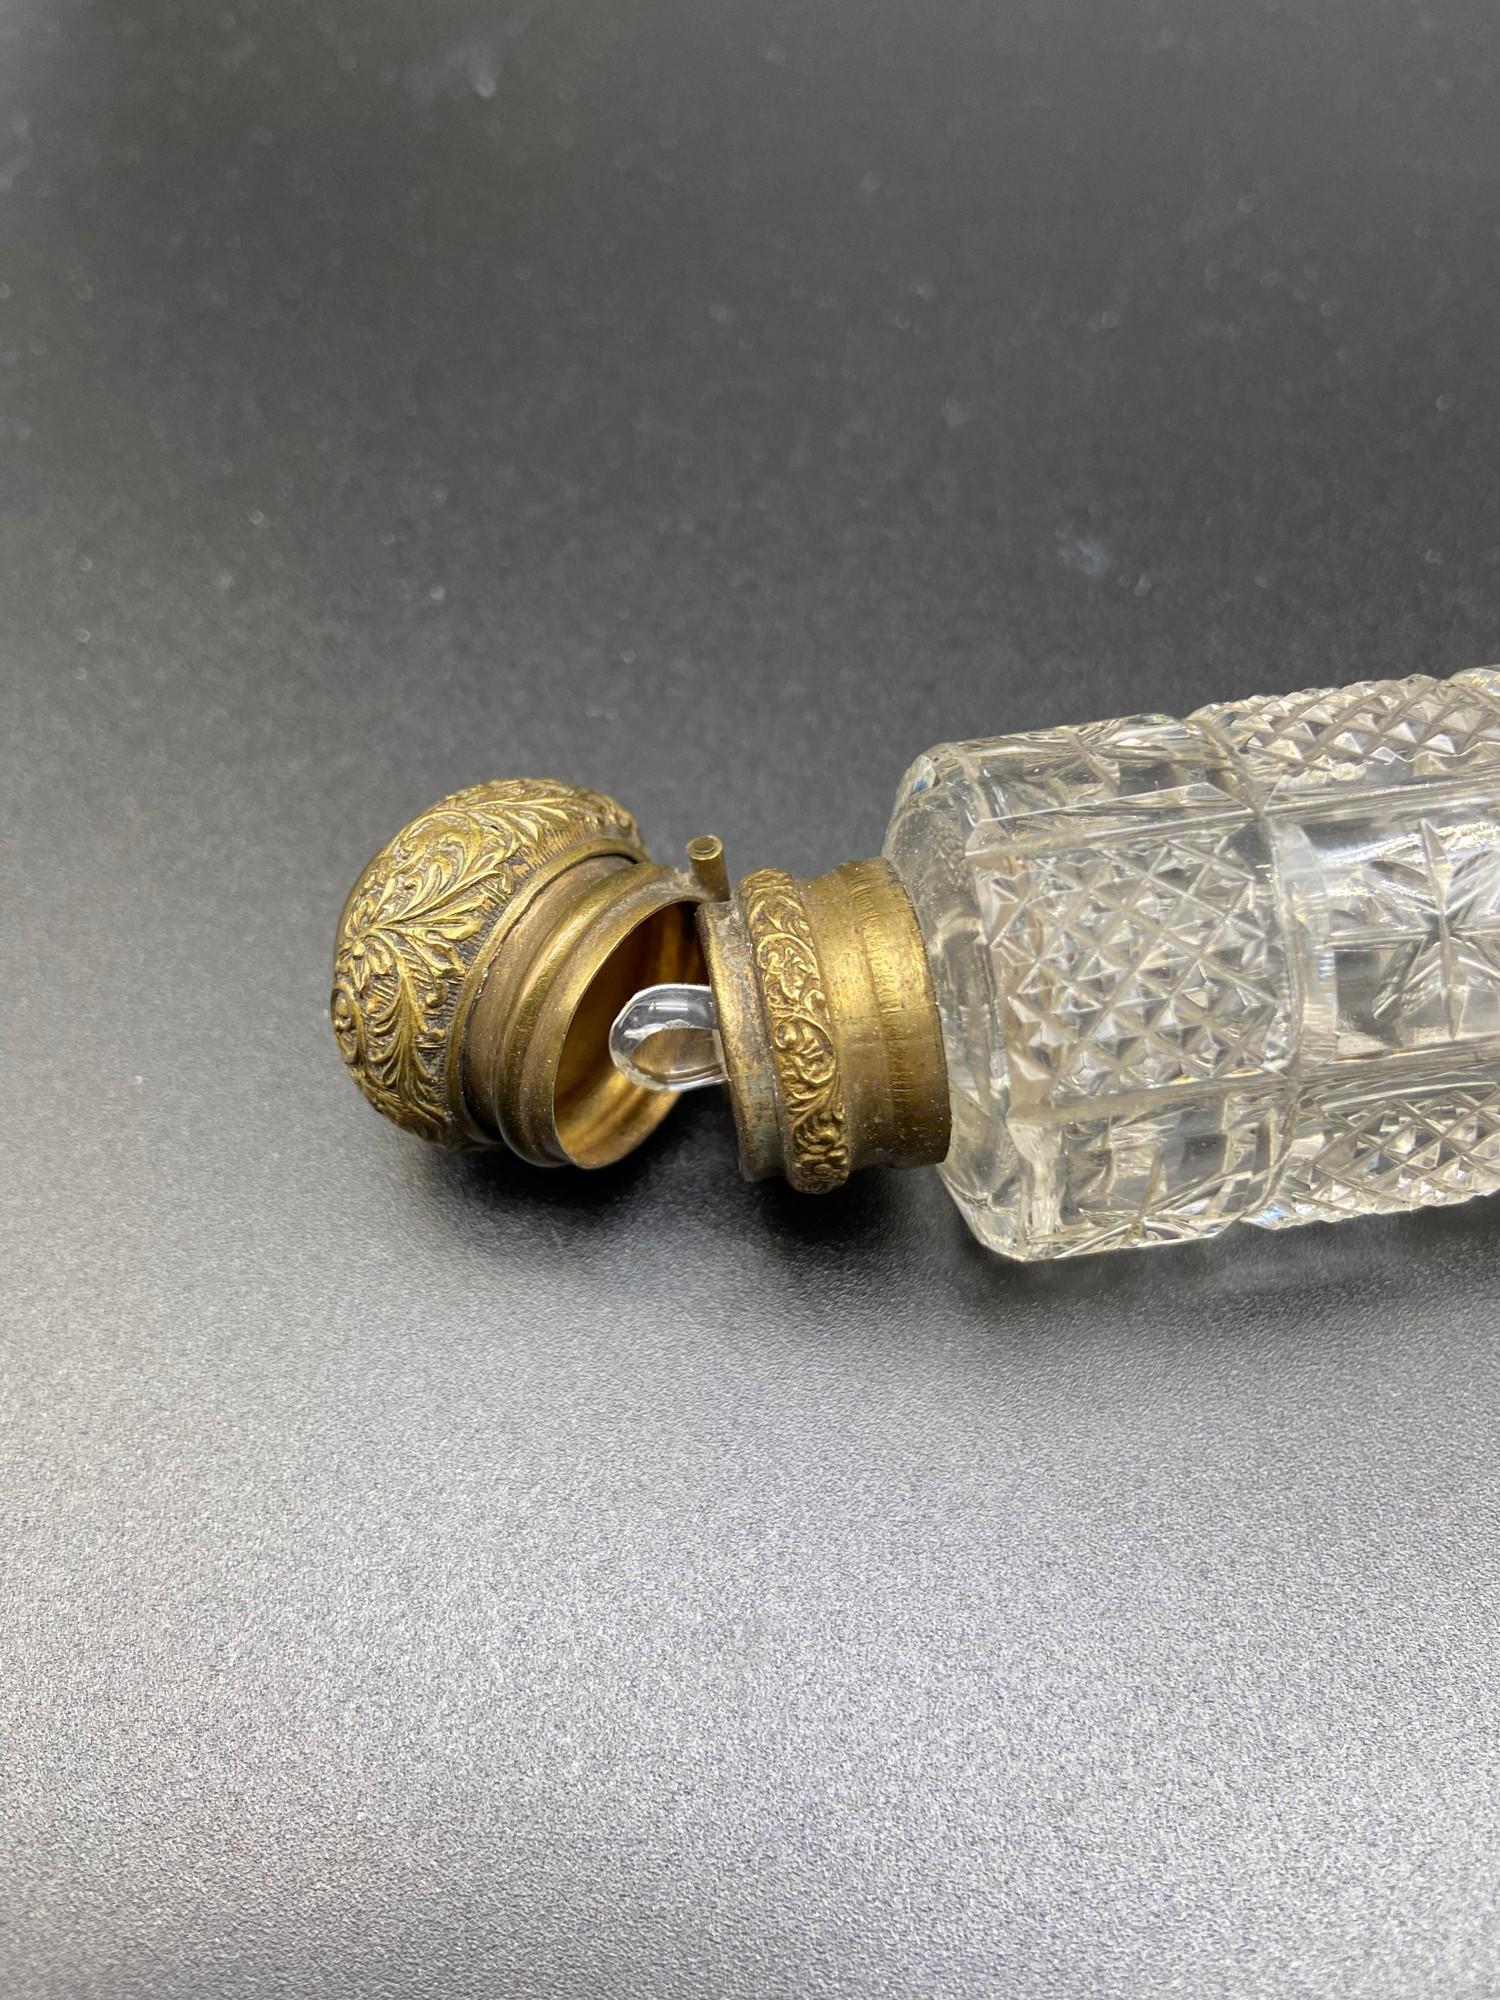 Antique double ended perfume bottle. Designed with two gilt metal tops and cut glass body. Comes - Image 4 of 8